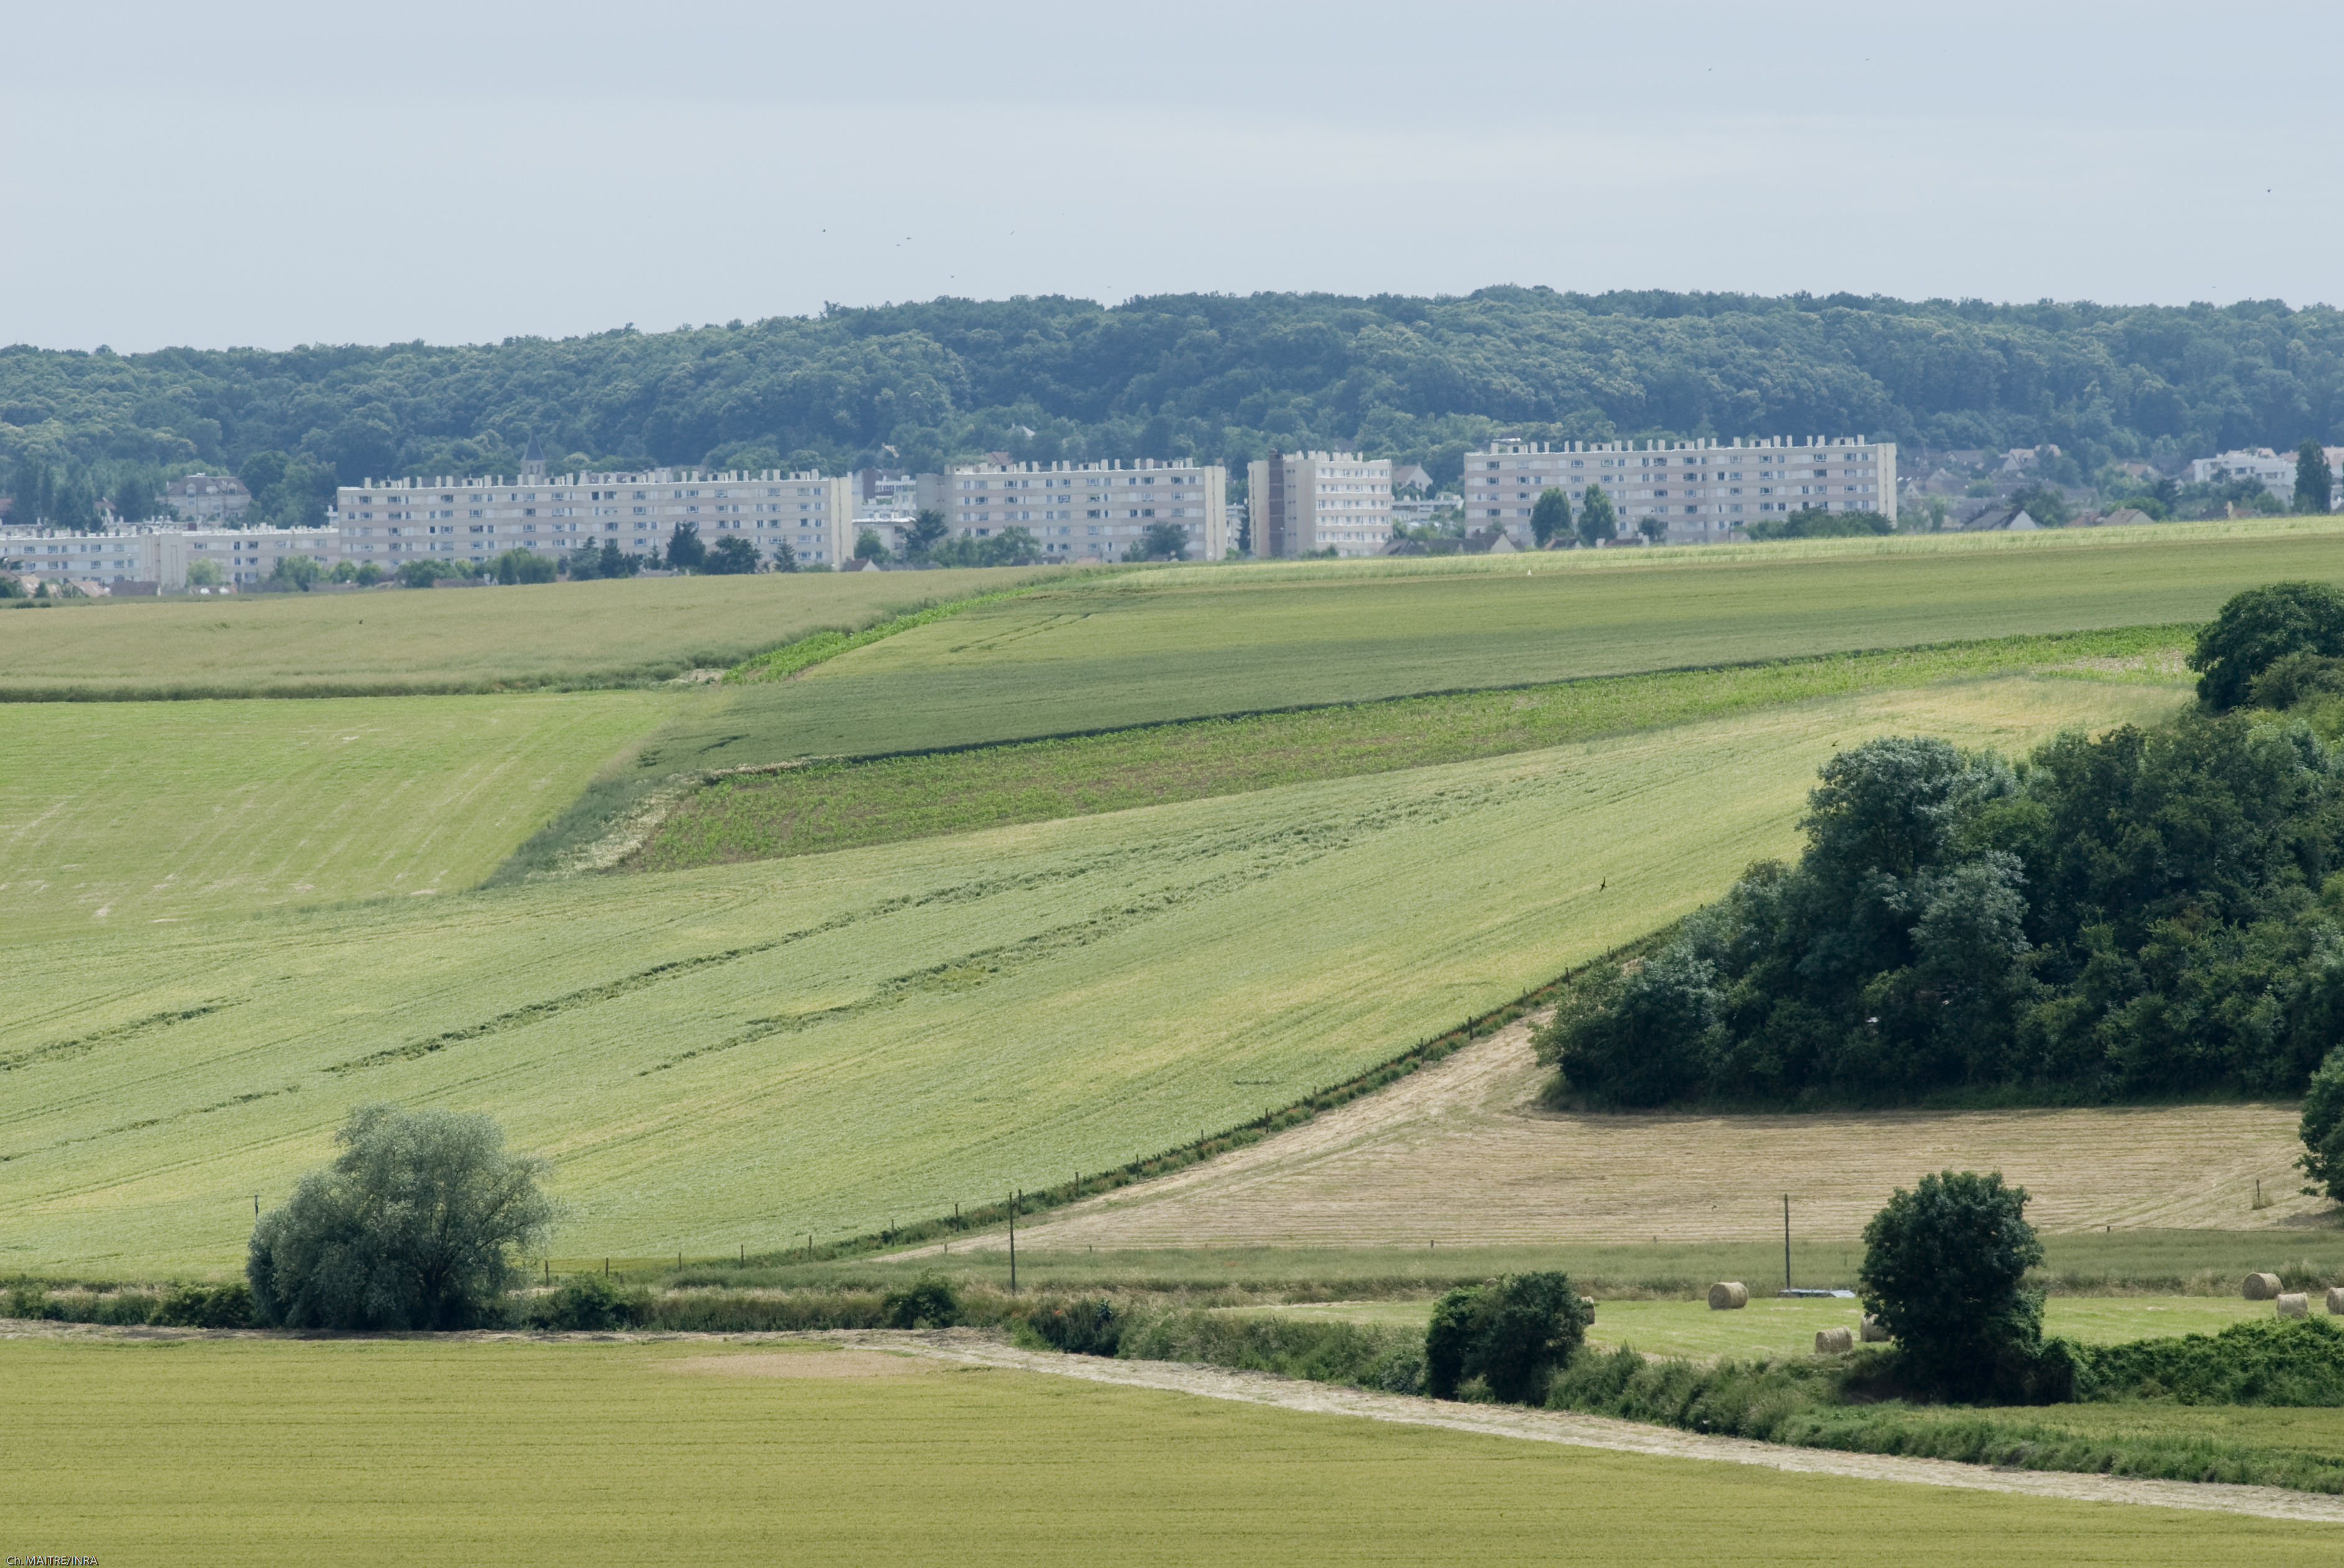 Residents' exposure to pesticides: how close are agricultural areas to residential buildings in France?